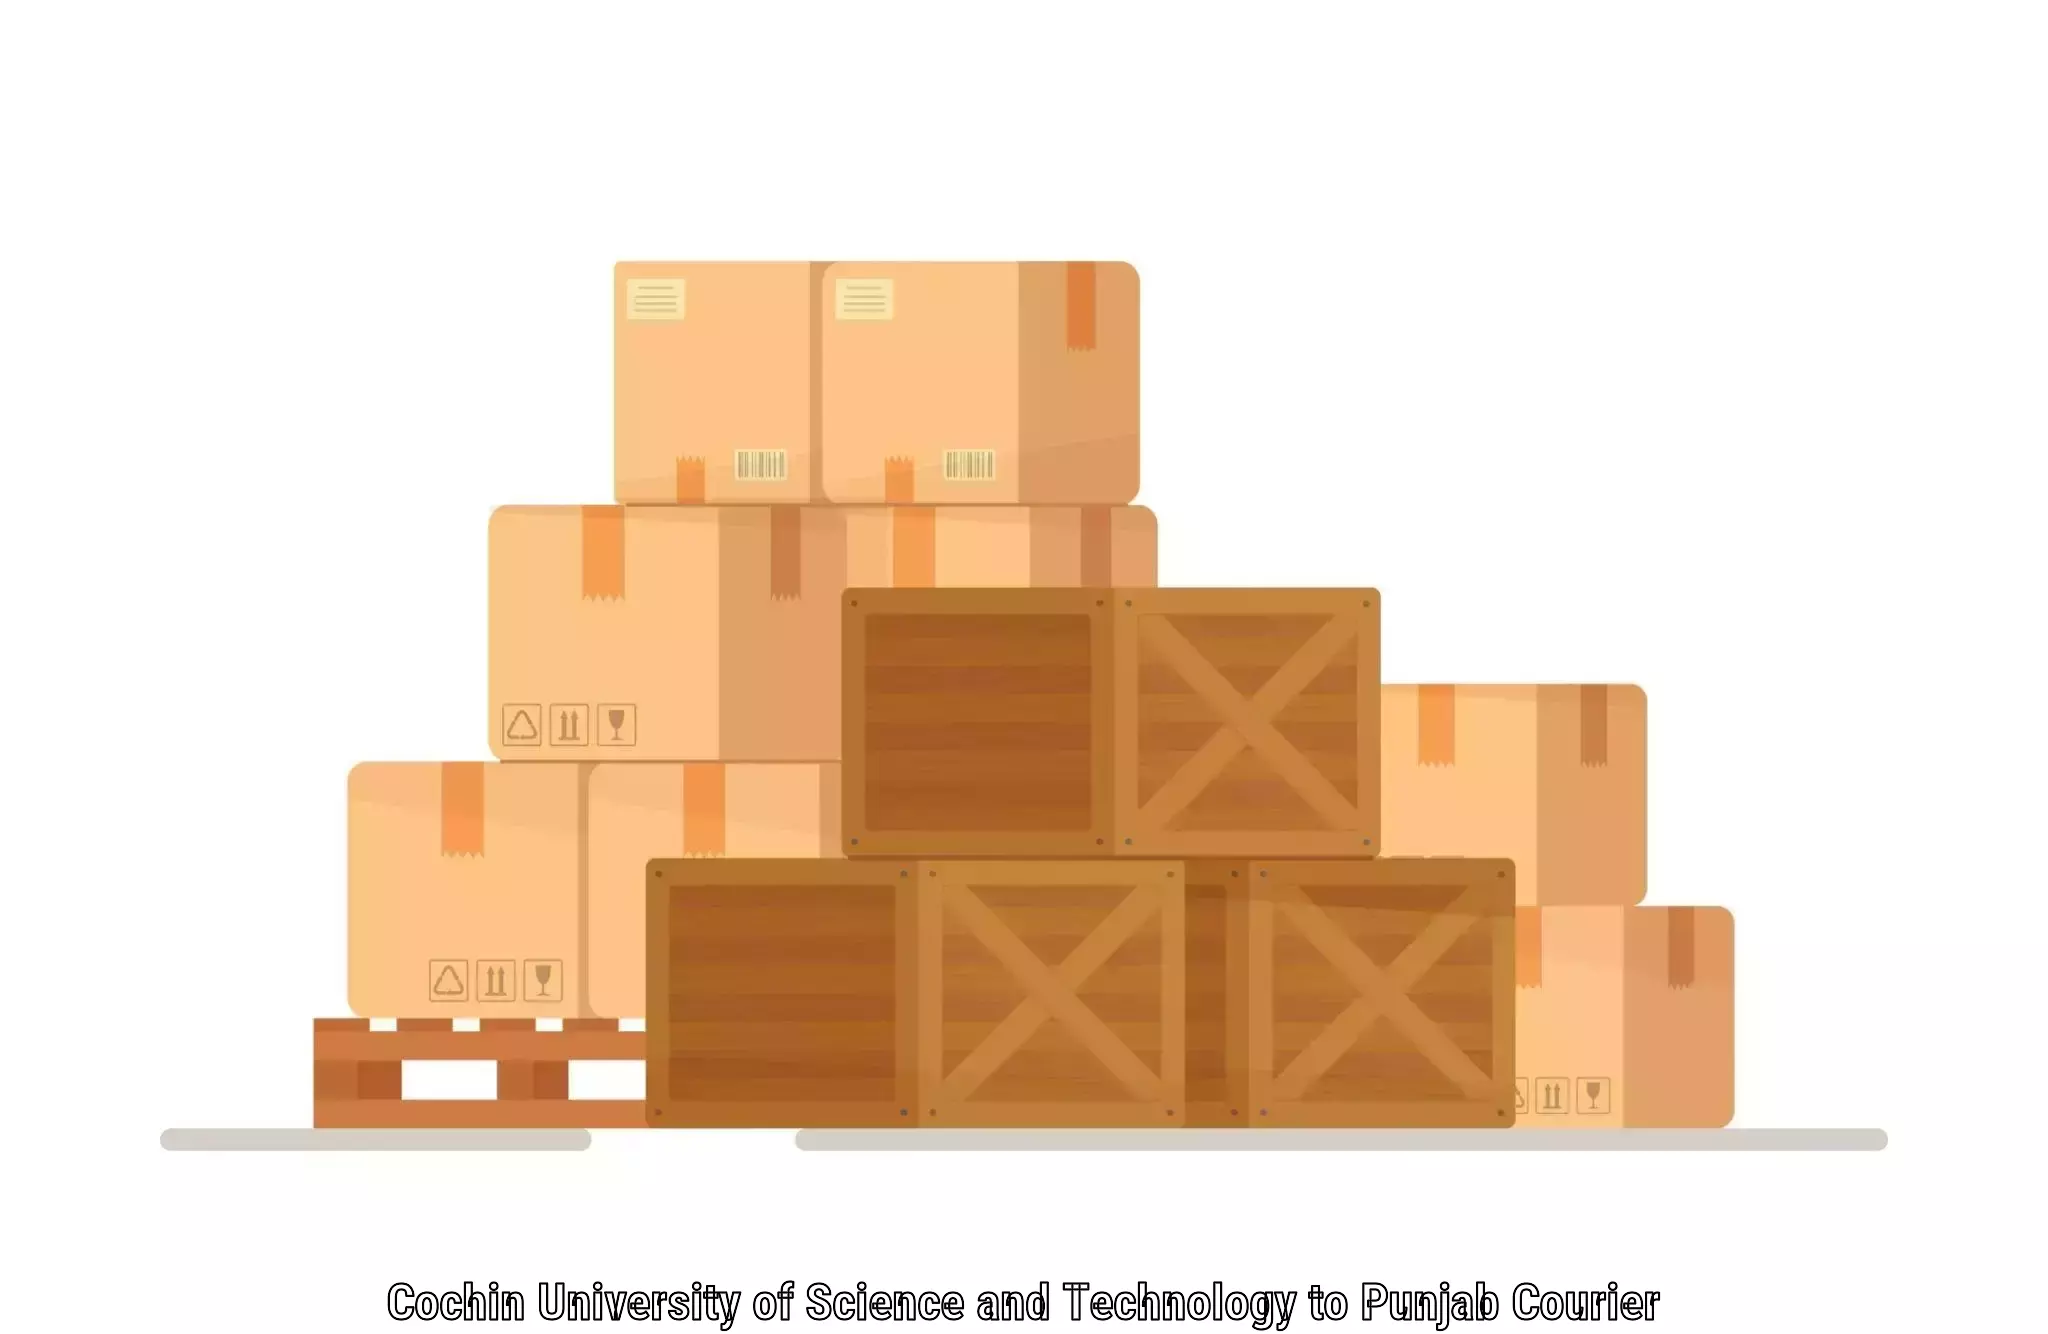 Reliable delivery network in Cochin University of Science and Technology to Punjab